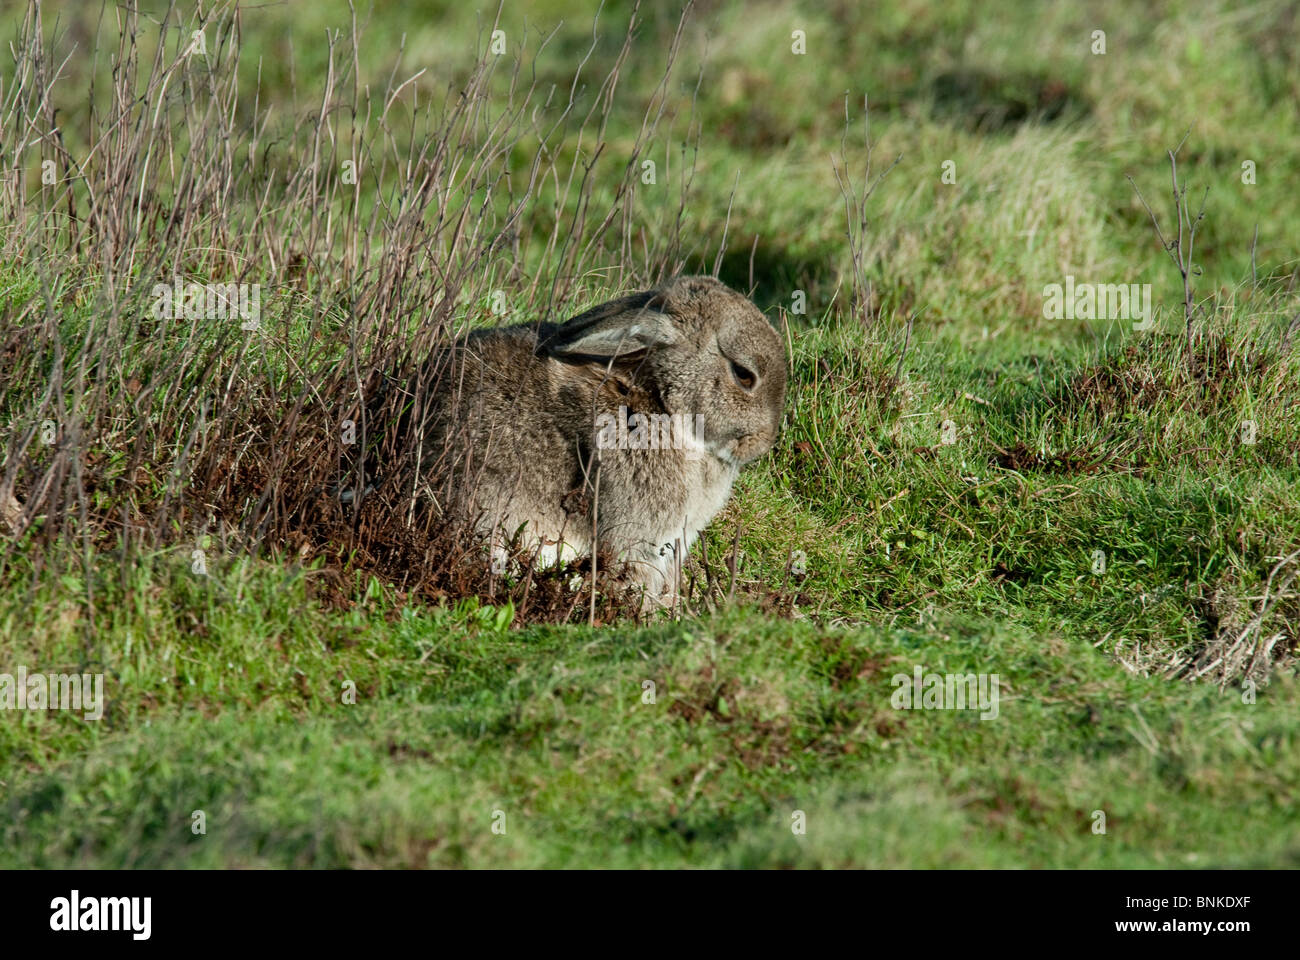 A wild rabbit Oryctolagus cunniculus resting in a field Stock Photo